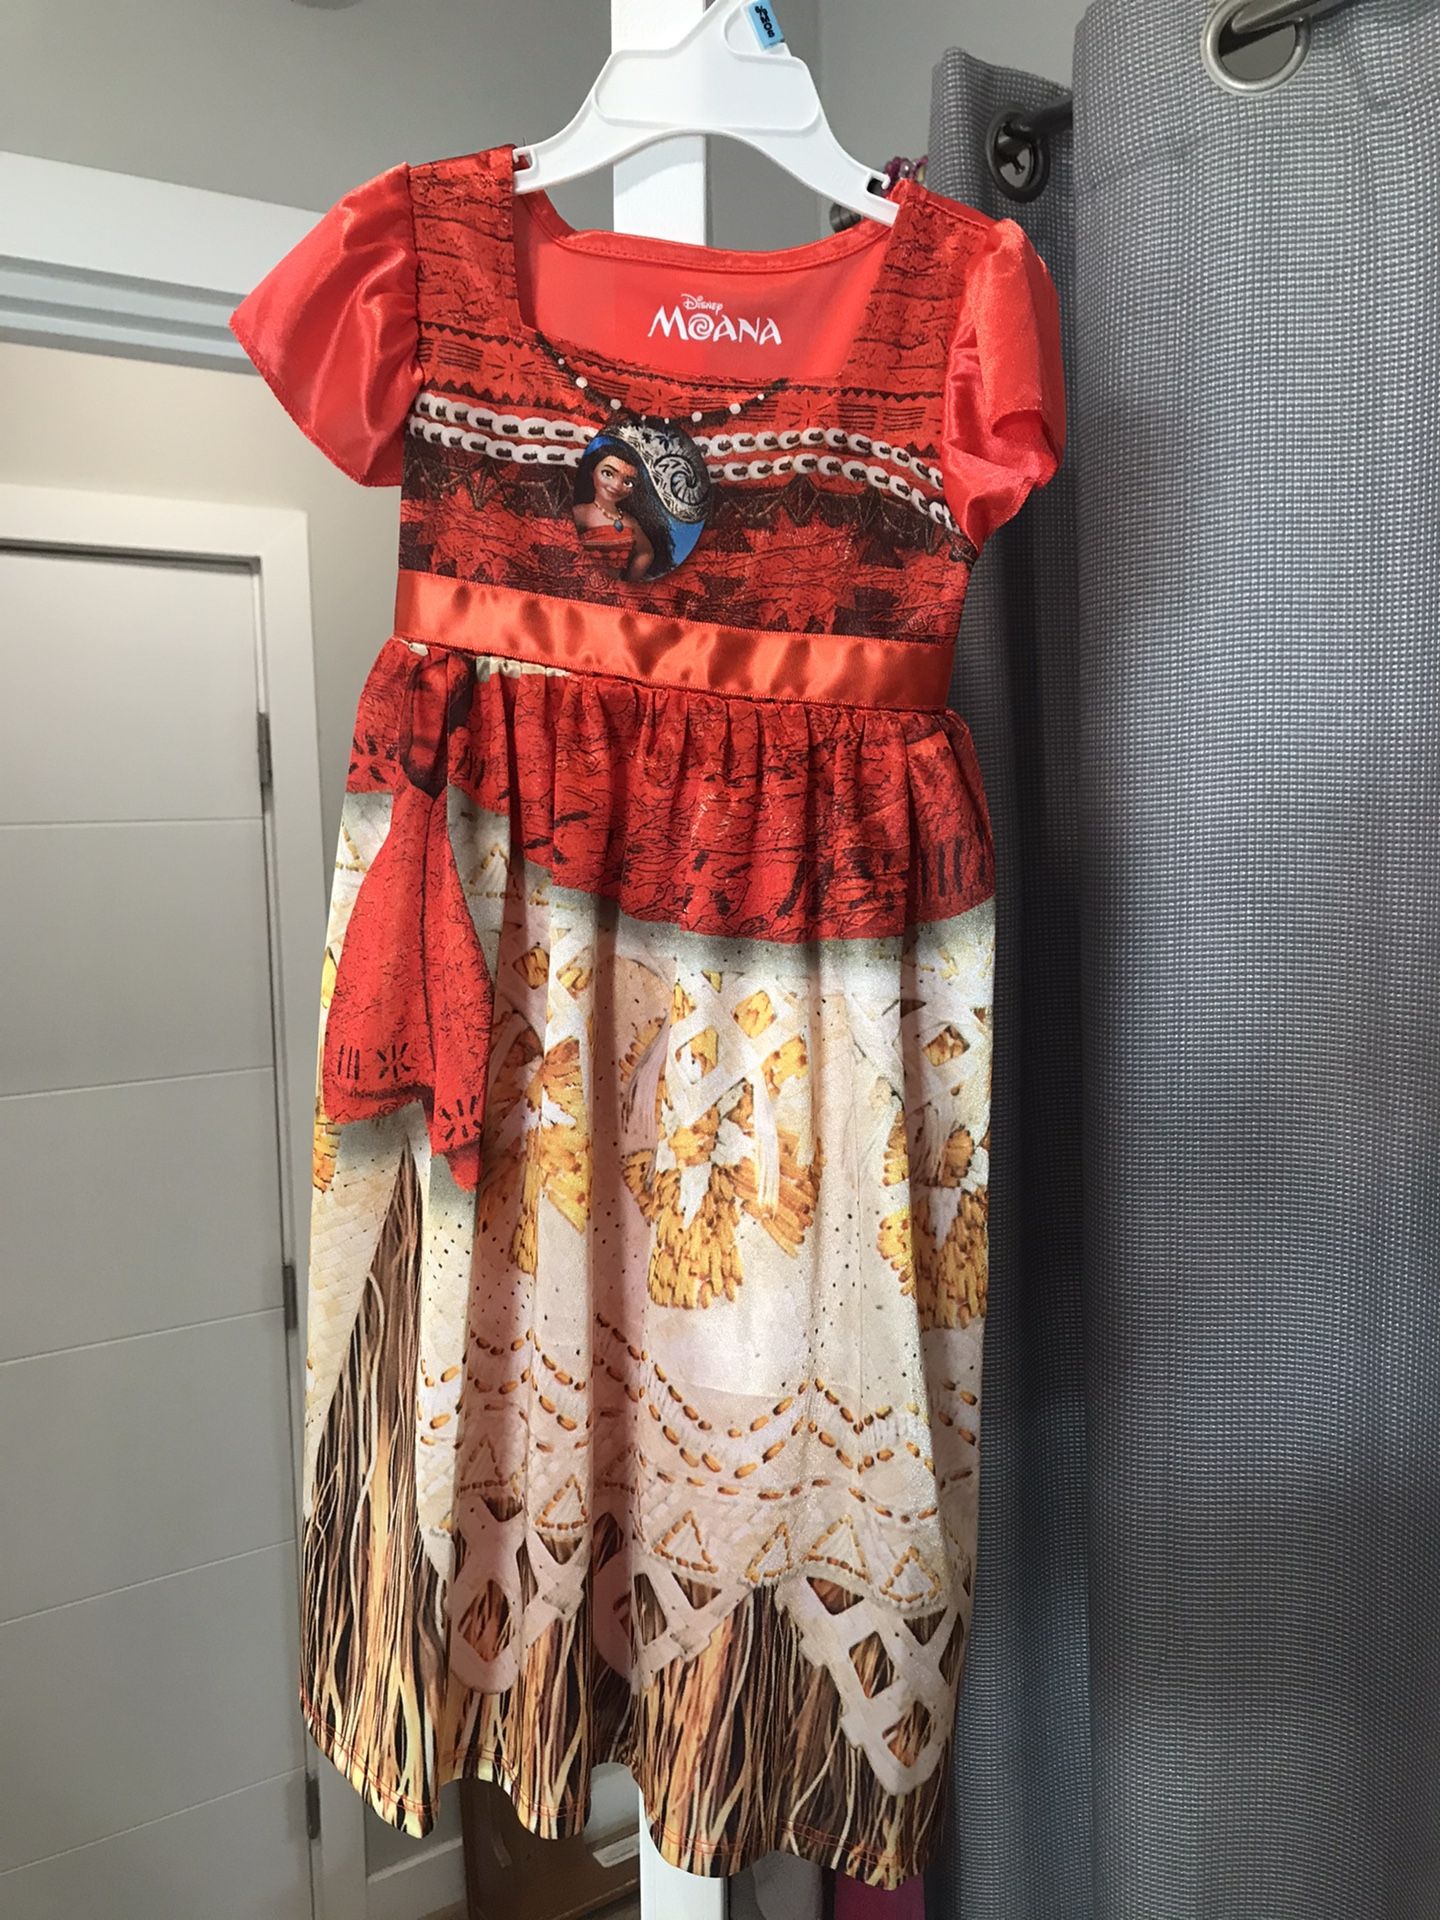 Moana 2T dress. Made for comfort. Never worn, mint condition.